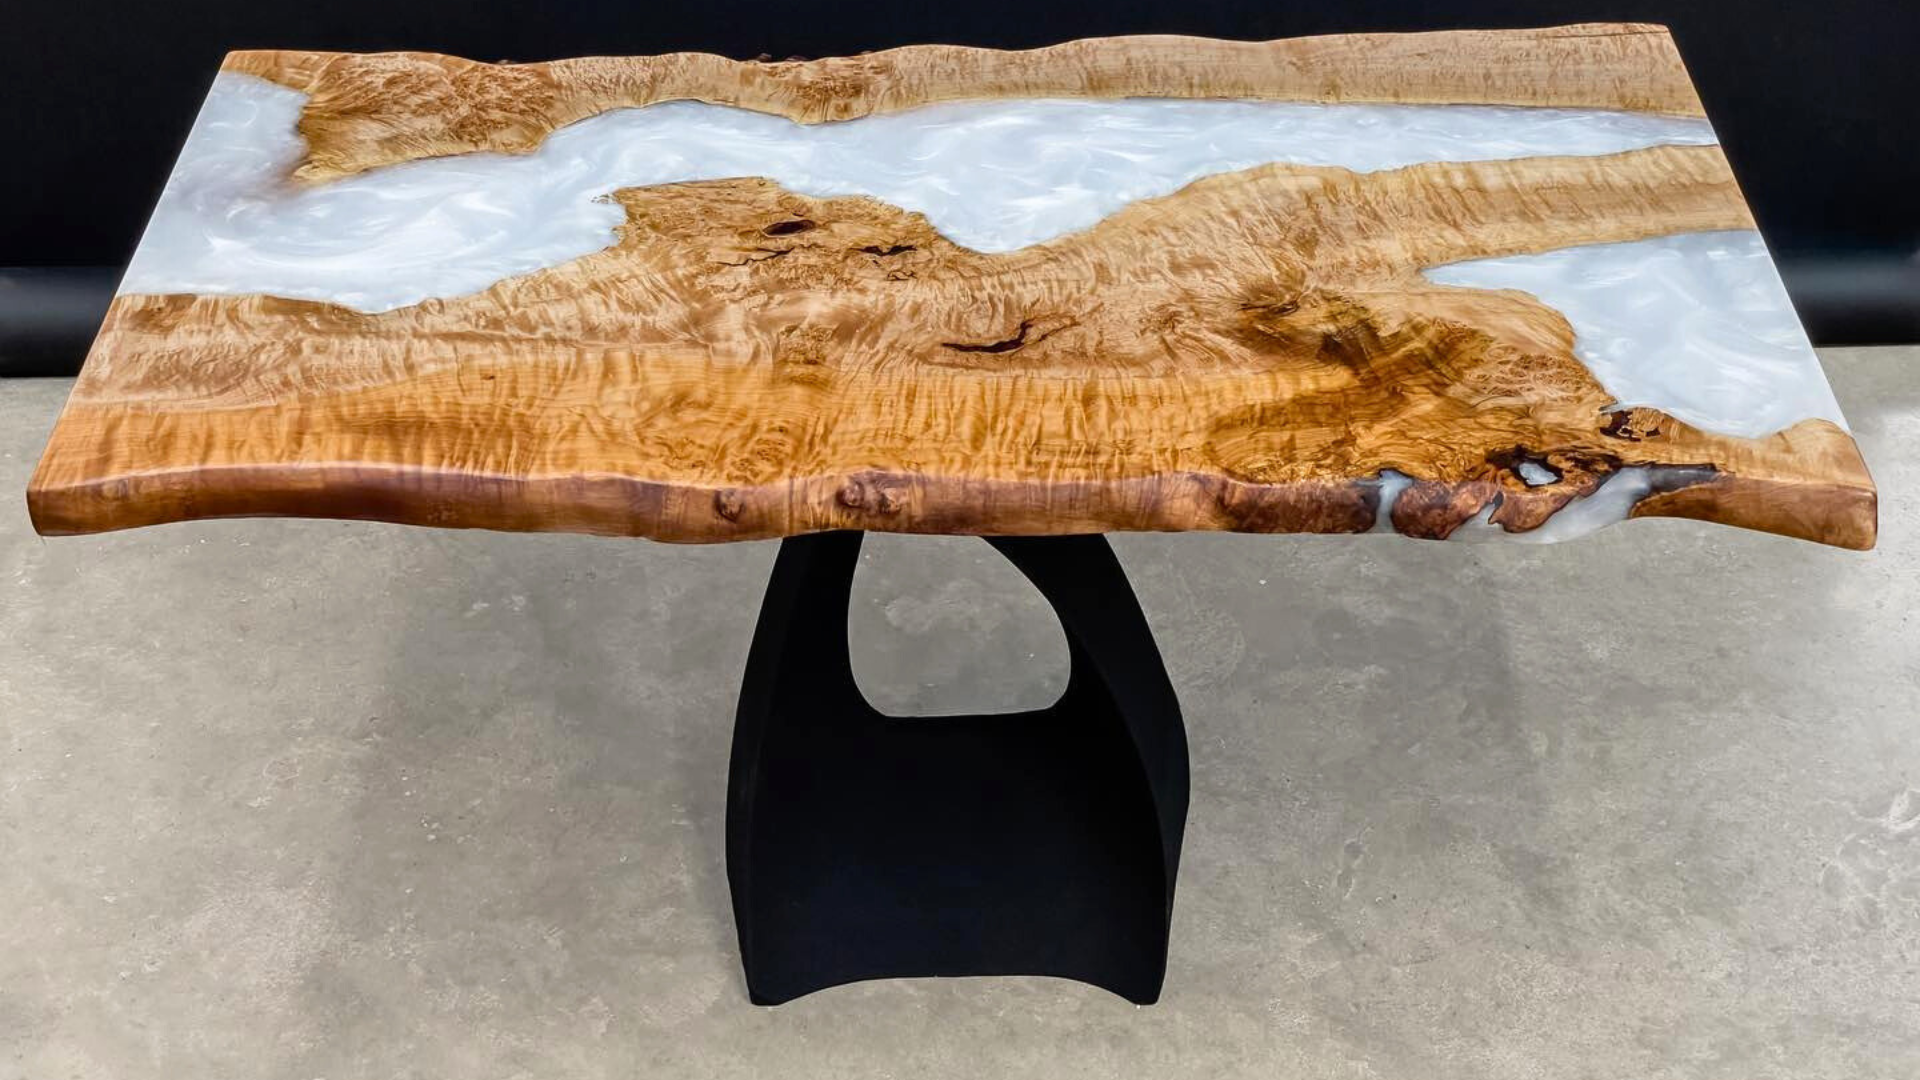 In this blog post, we will show you how to make an epoxy resin table step by step, using some basic tools and materials.